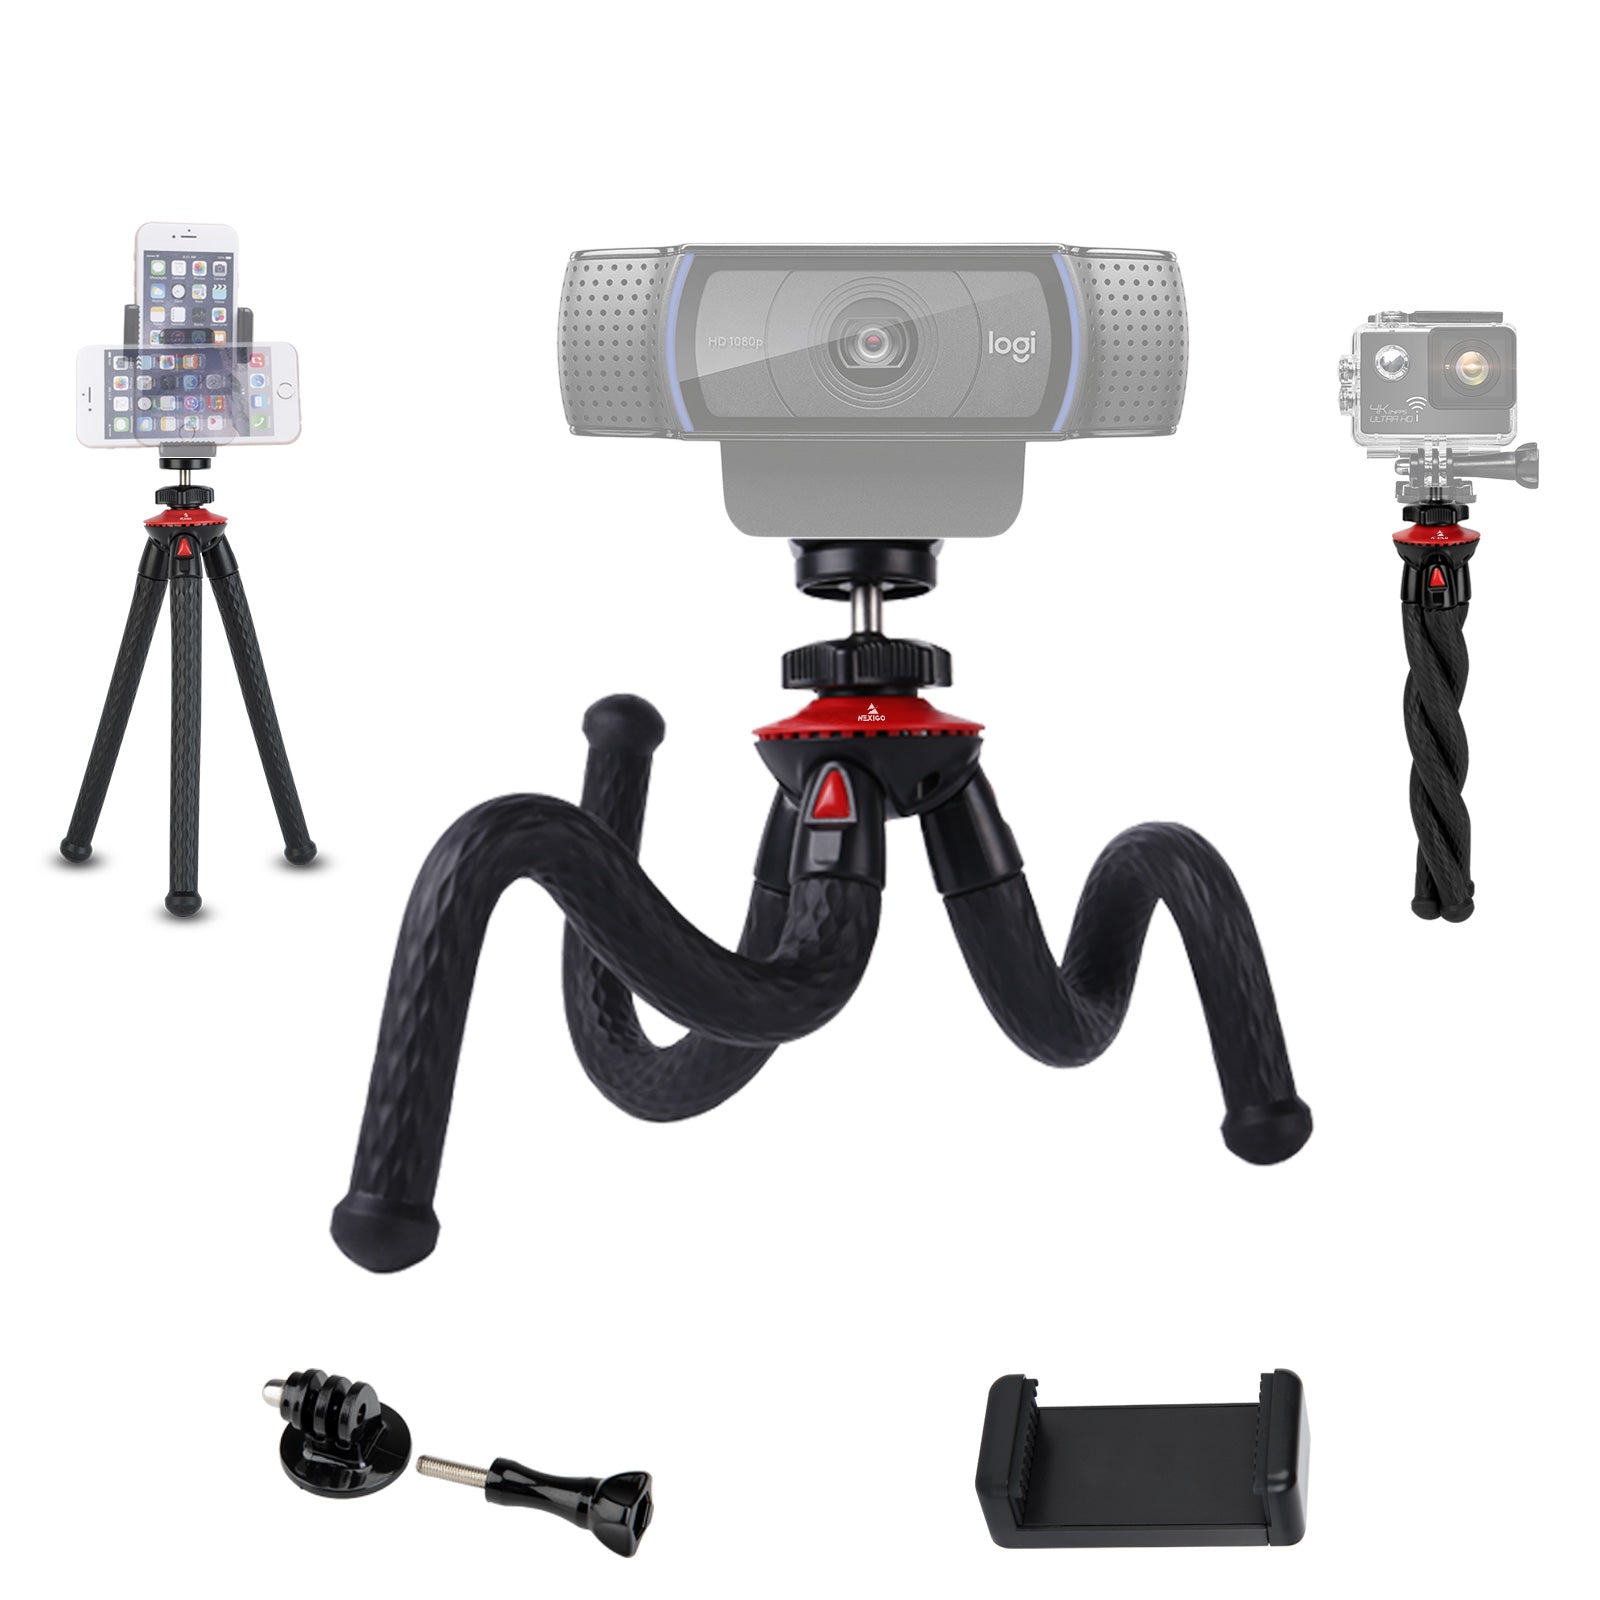 It is a rotatable webcam, camera, and phone holder that can be twisted and adjusted.